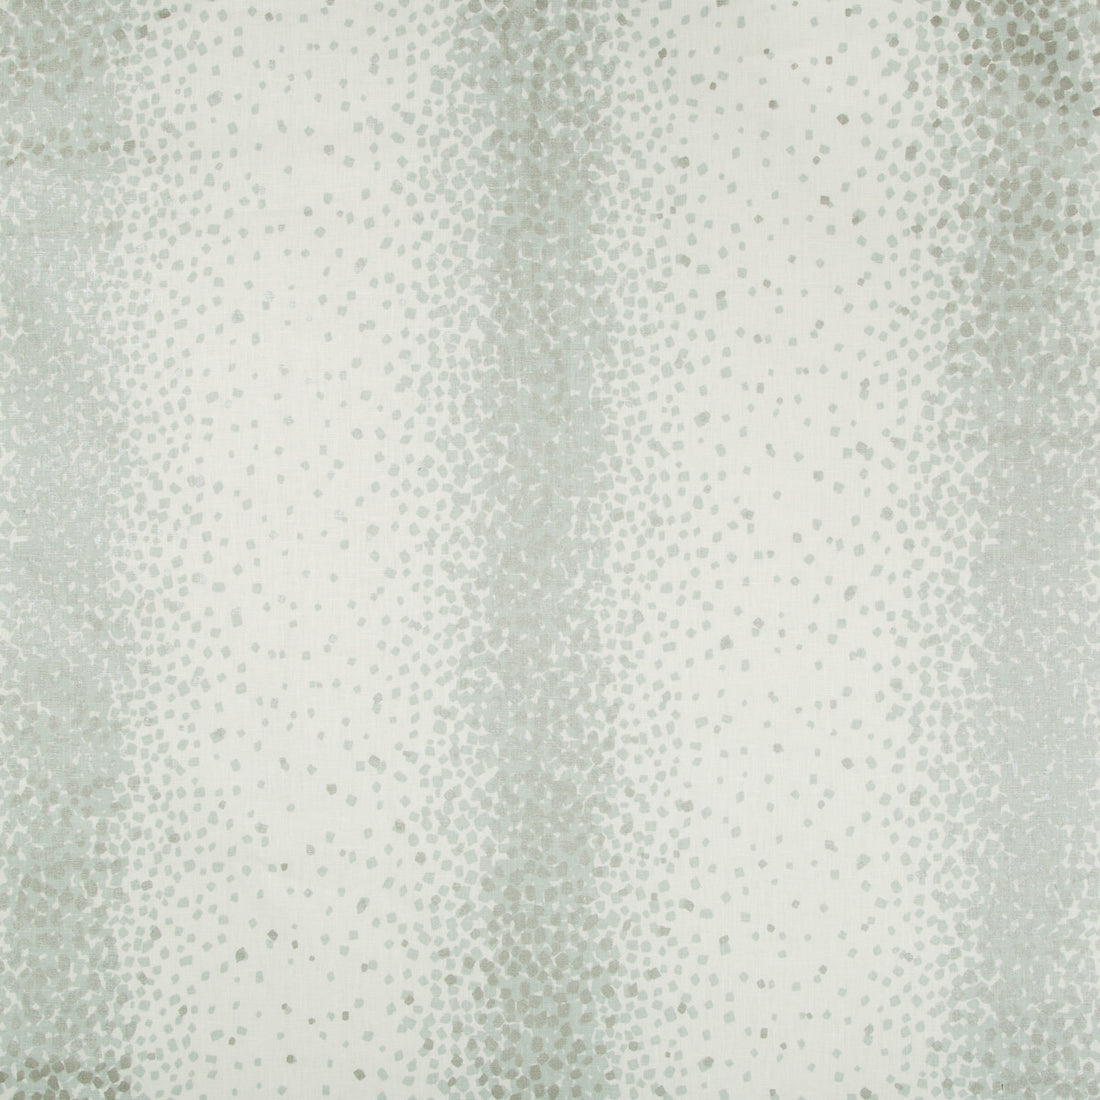 Jaunty fabric in mineral color - pattern JAUNTY.1130.0 - by Kravet Basics in the Thom Filicia Altitude collection